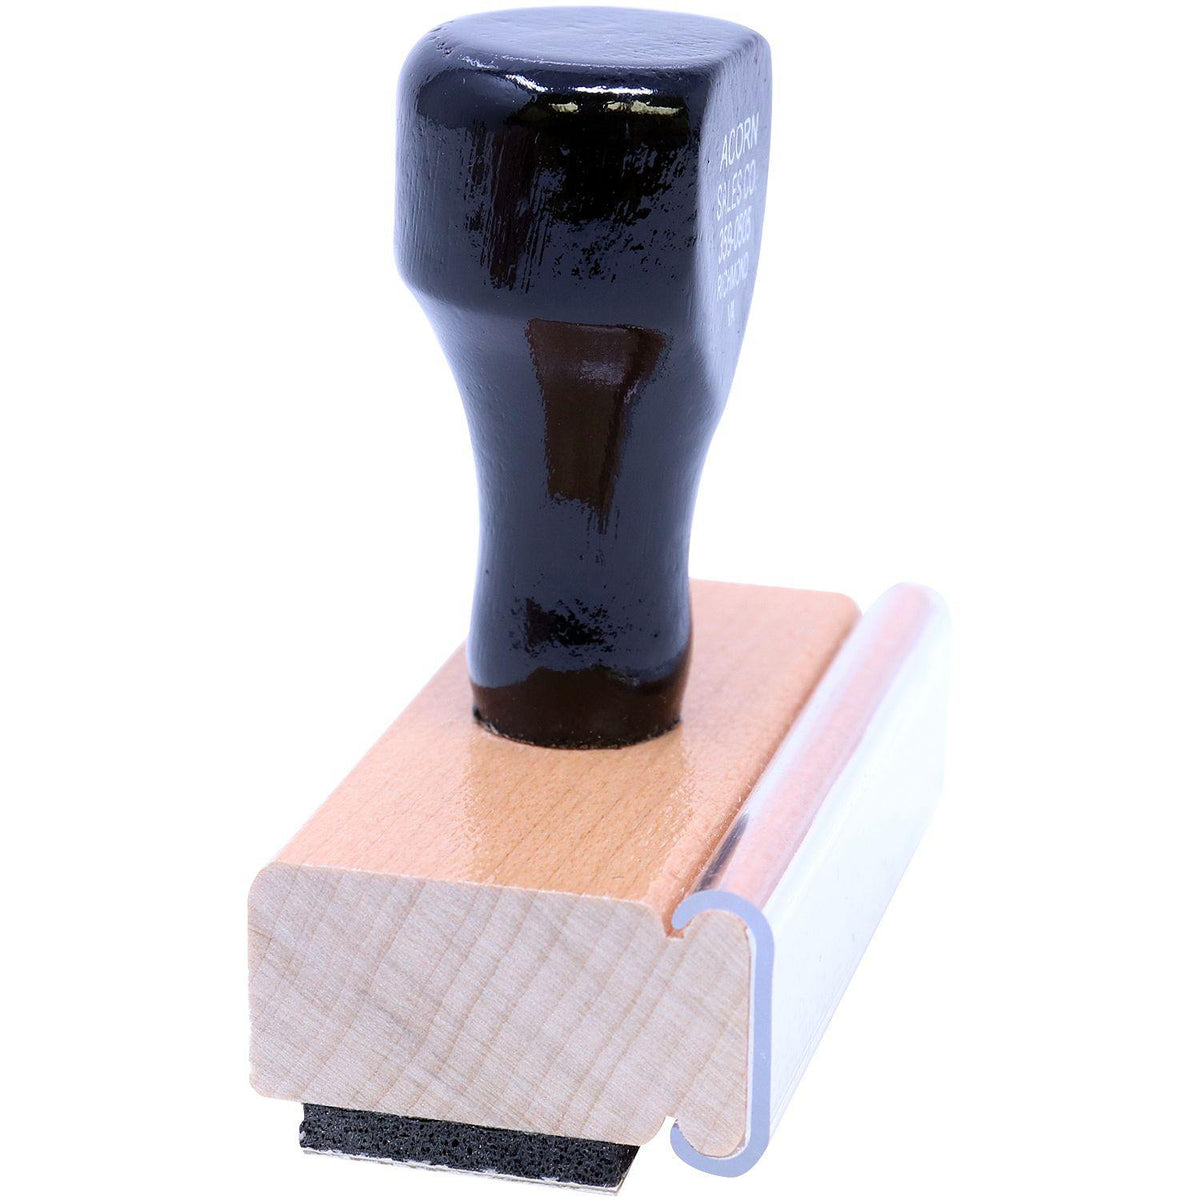 Side View of Blue Shield Rubber Stamp at an Angle